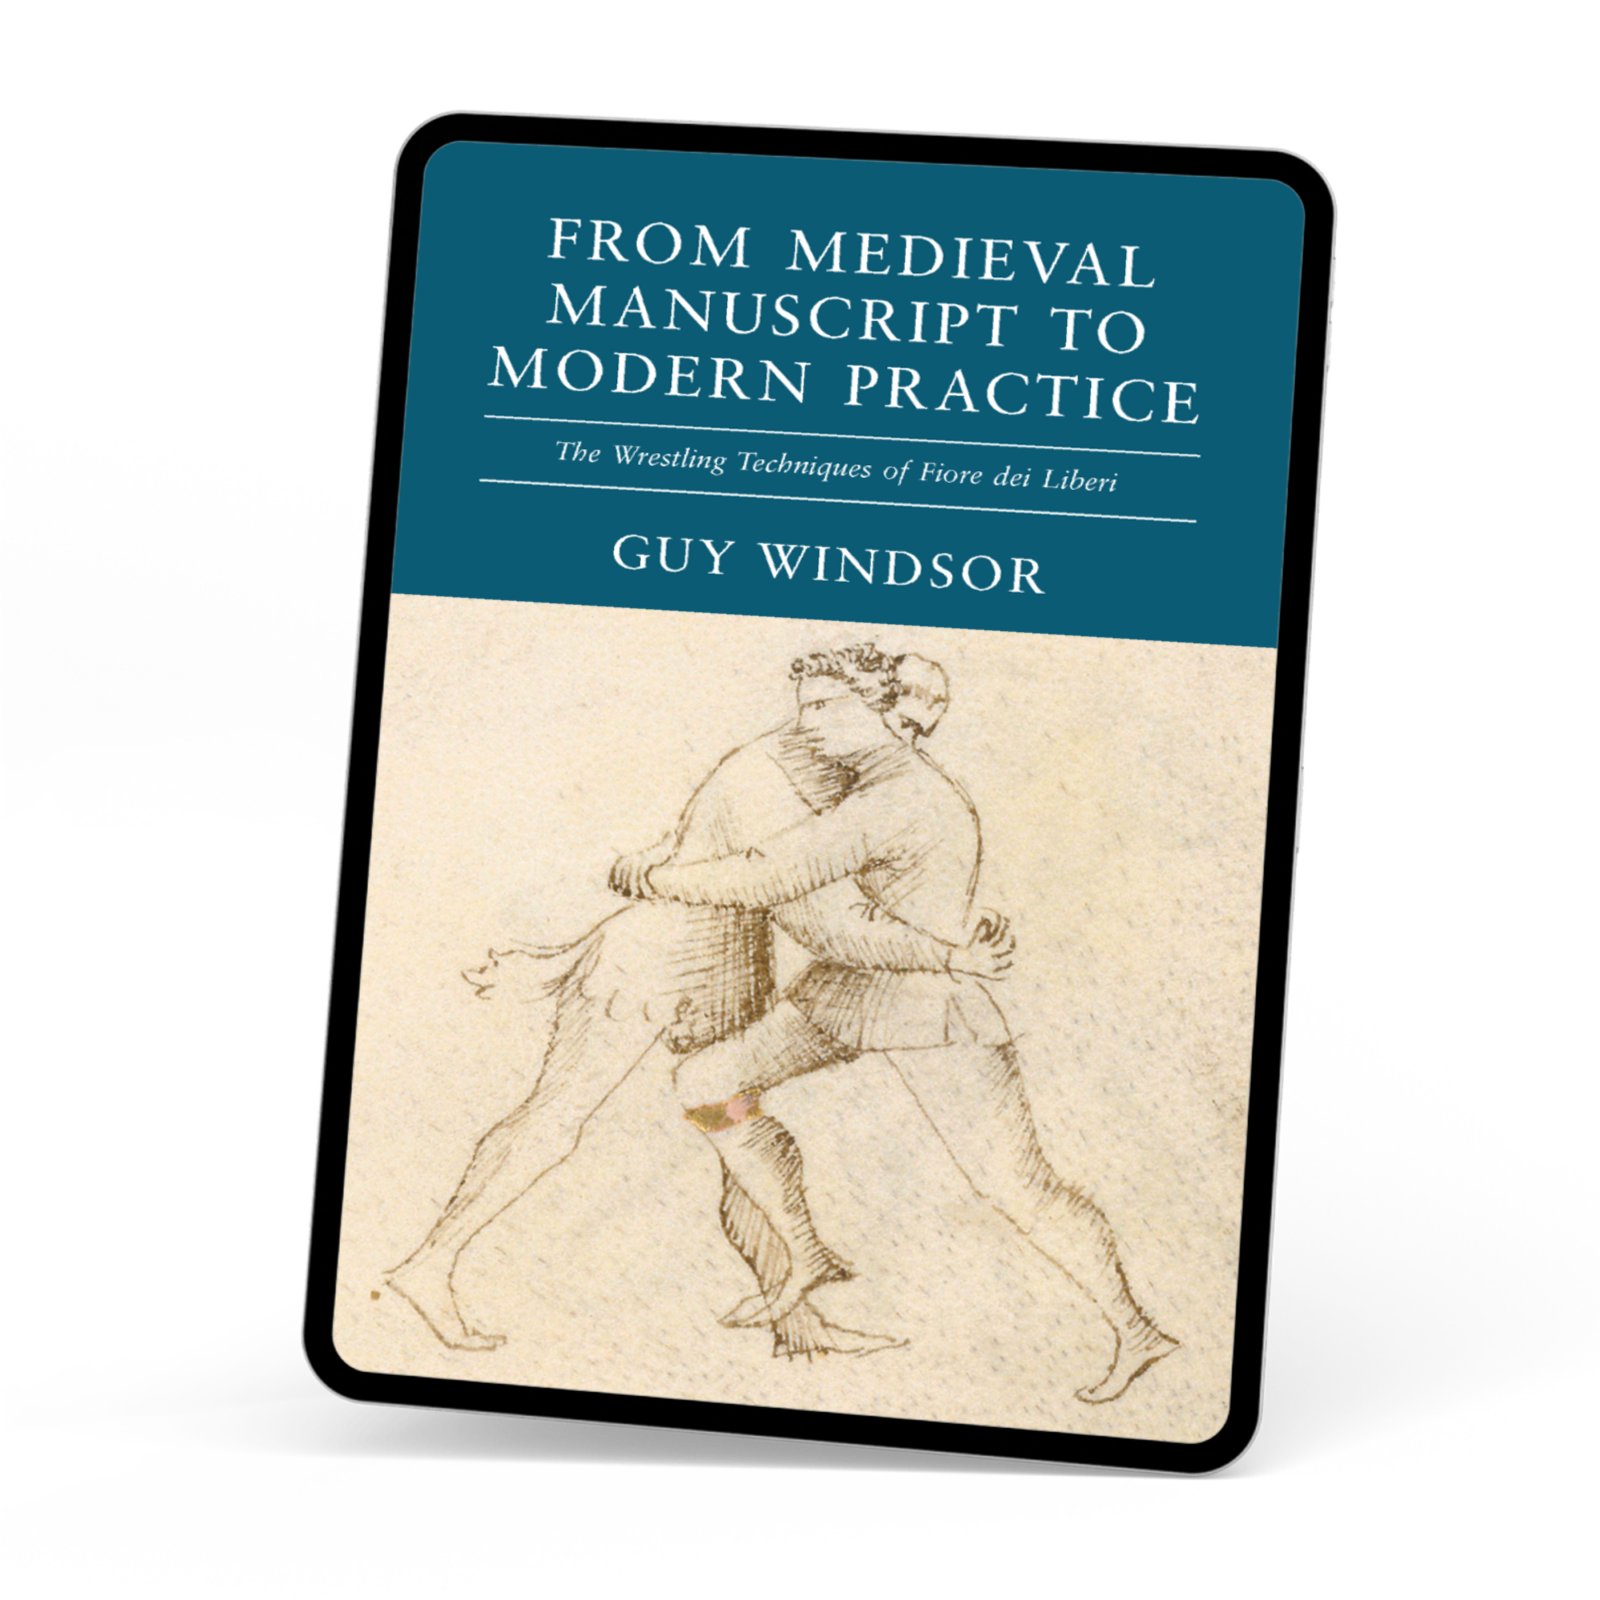 From Medieval Manuscript to Modern Practice: The Wrestling Techniques of Fiore dei Liberi (Ebook) by Guy Windsor